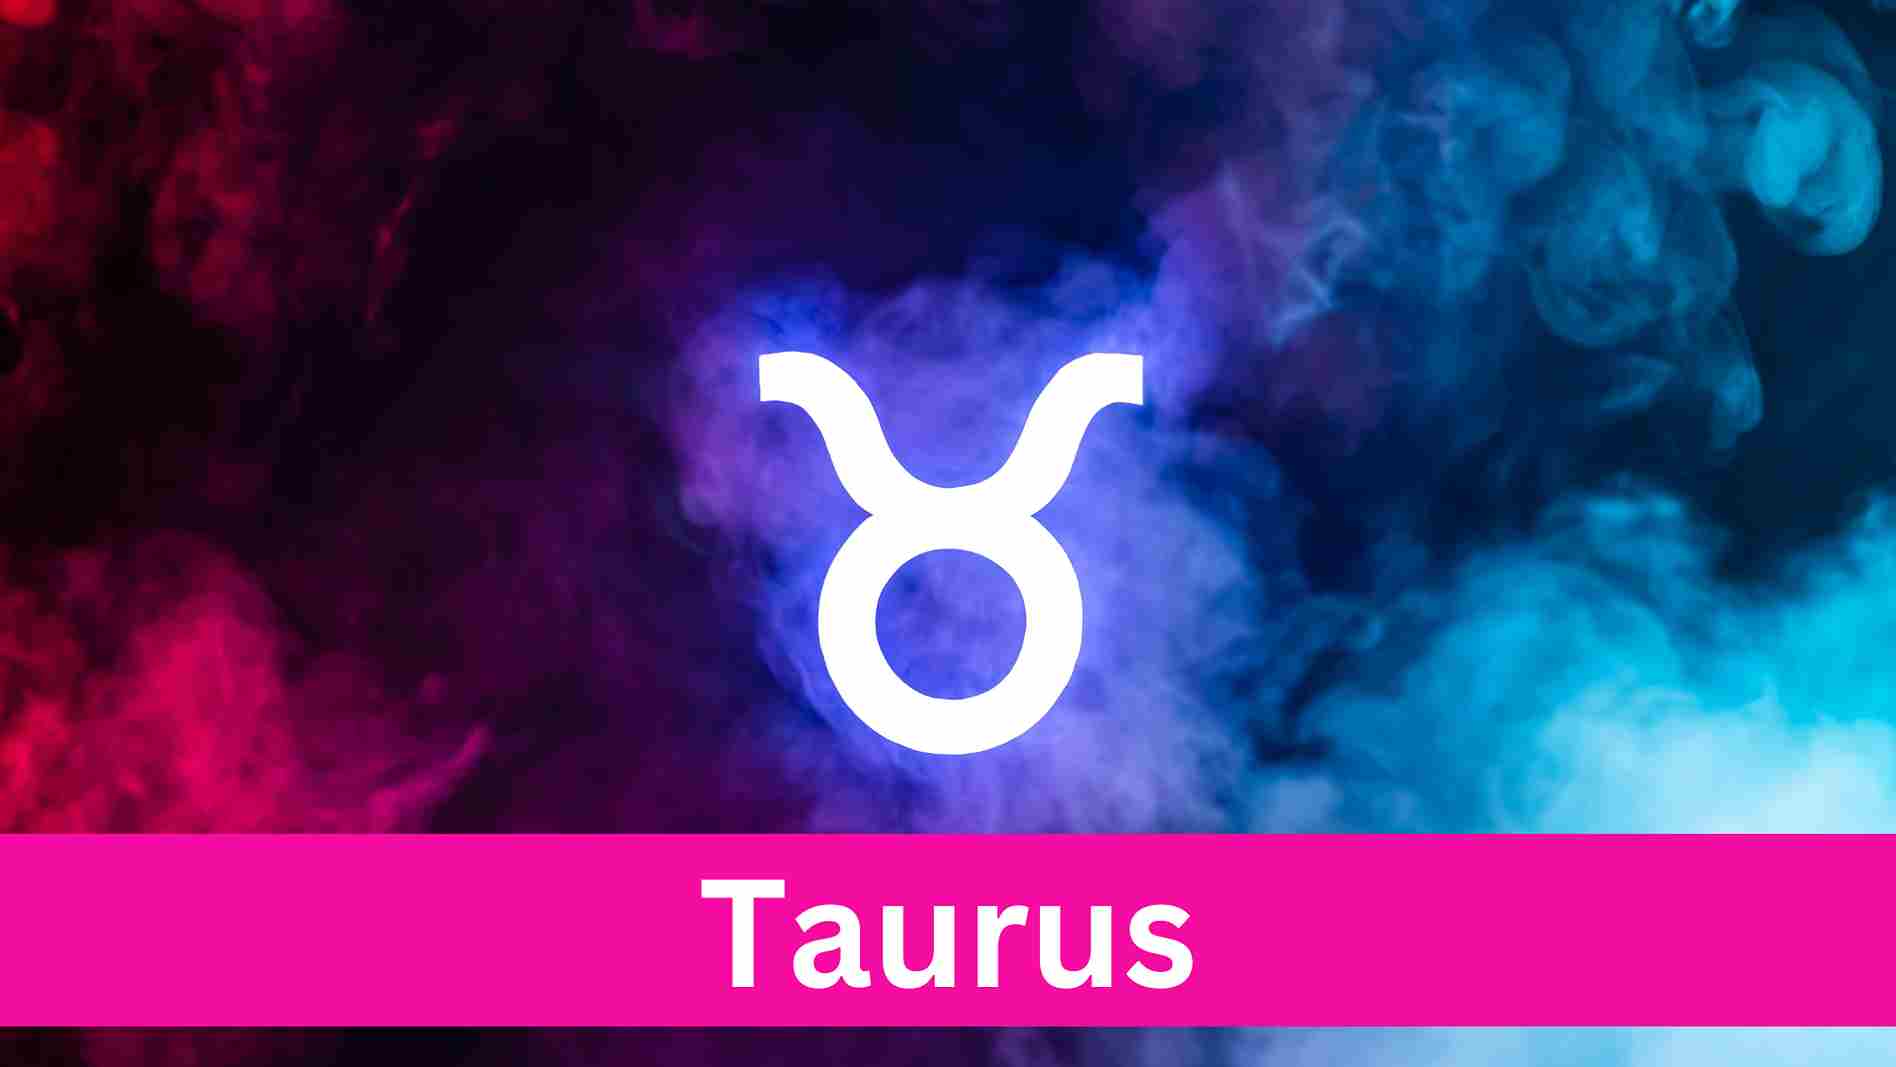 You are currently viewing Taurus horoscope for 2023